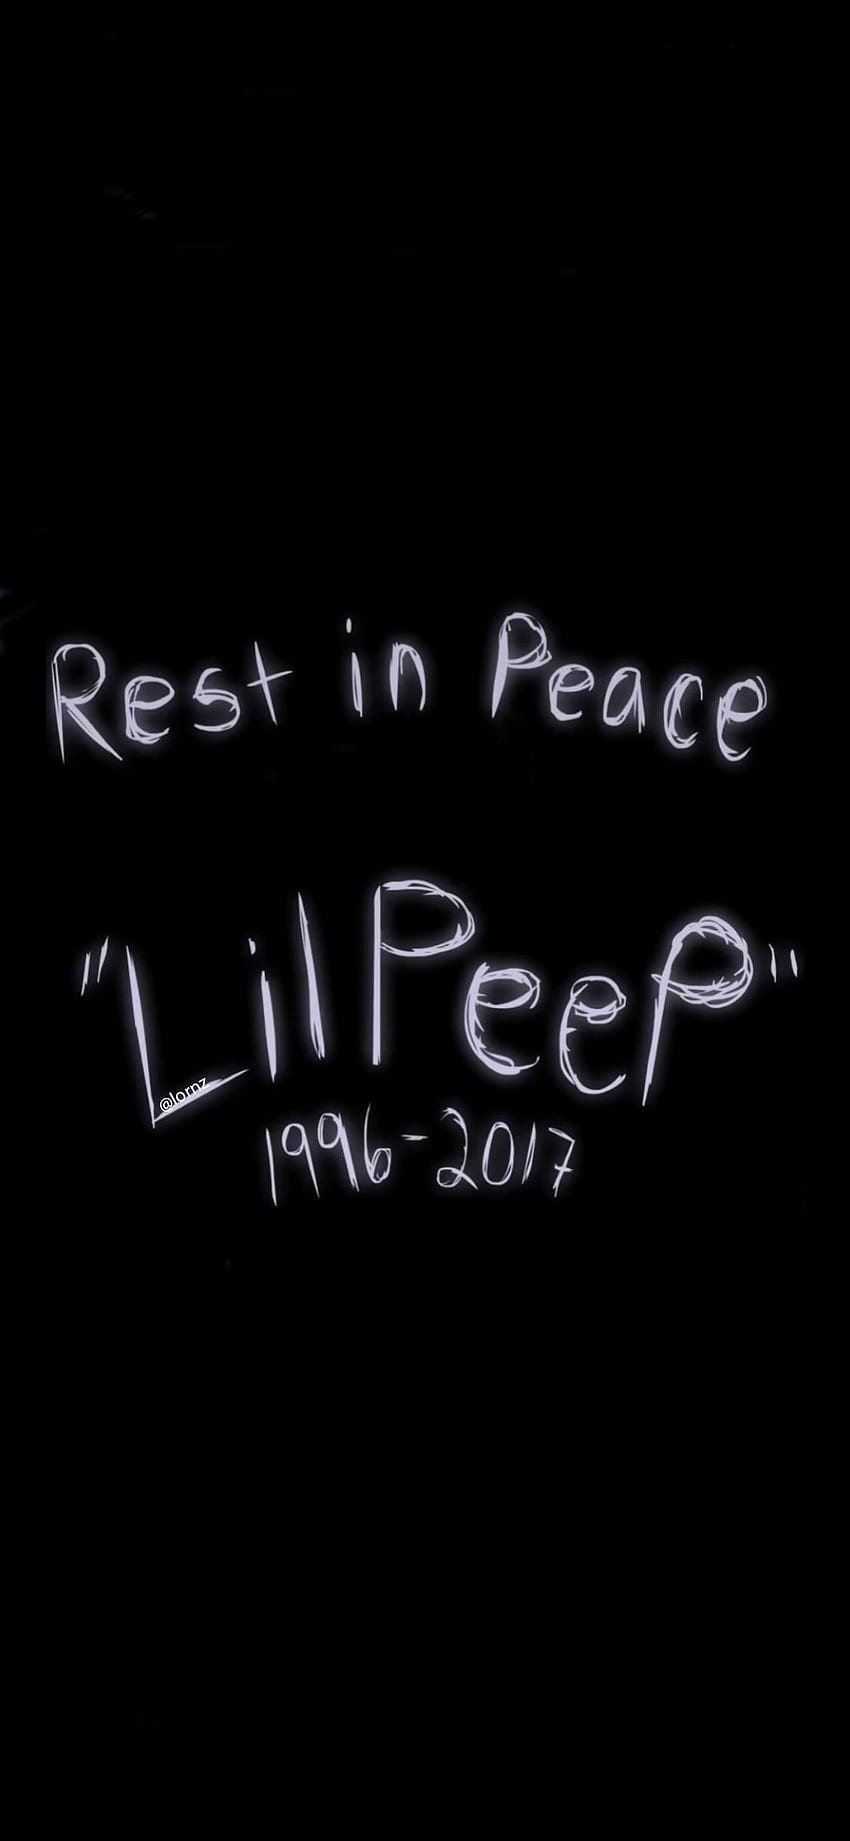 rip lil peep . Ill never forget you, Rest in peace, Lil HD phone wallpaper